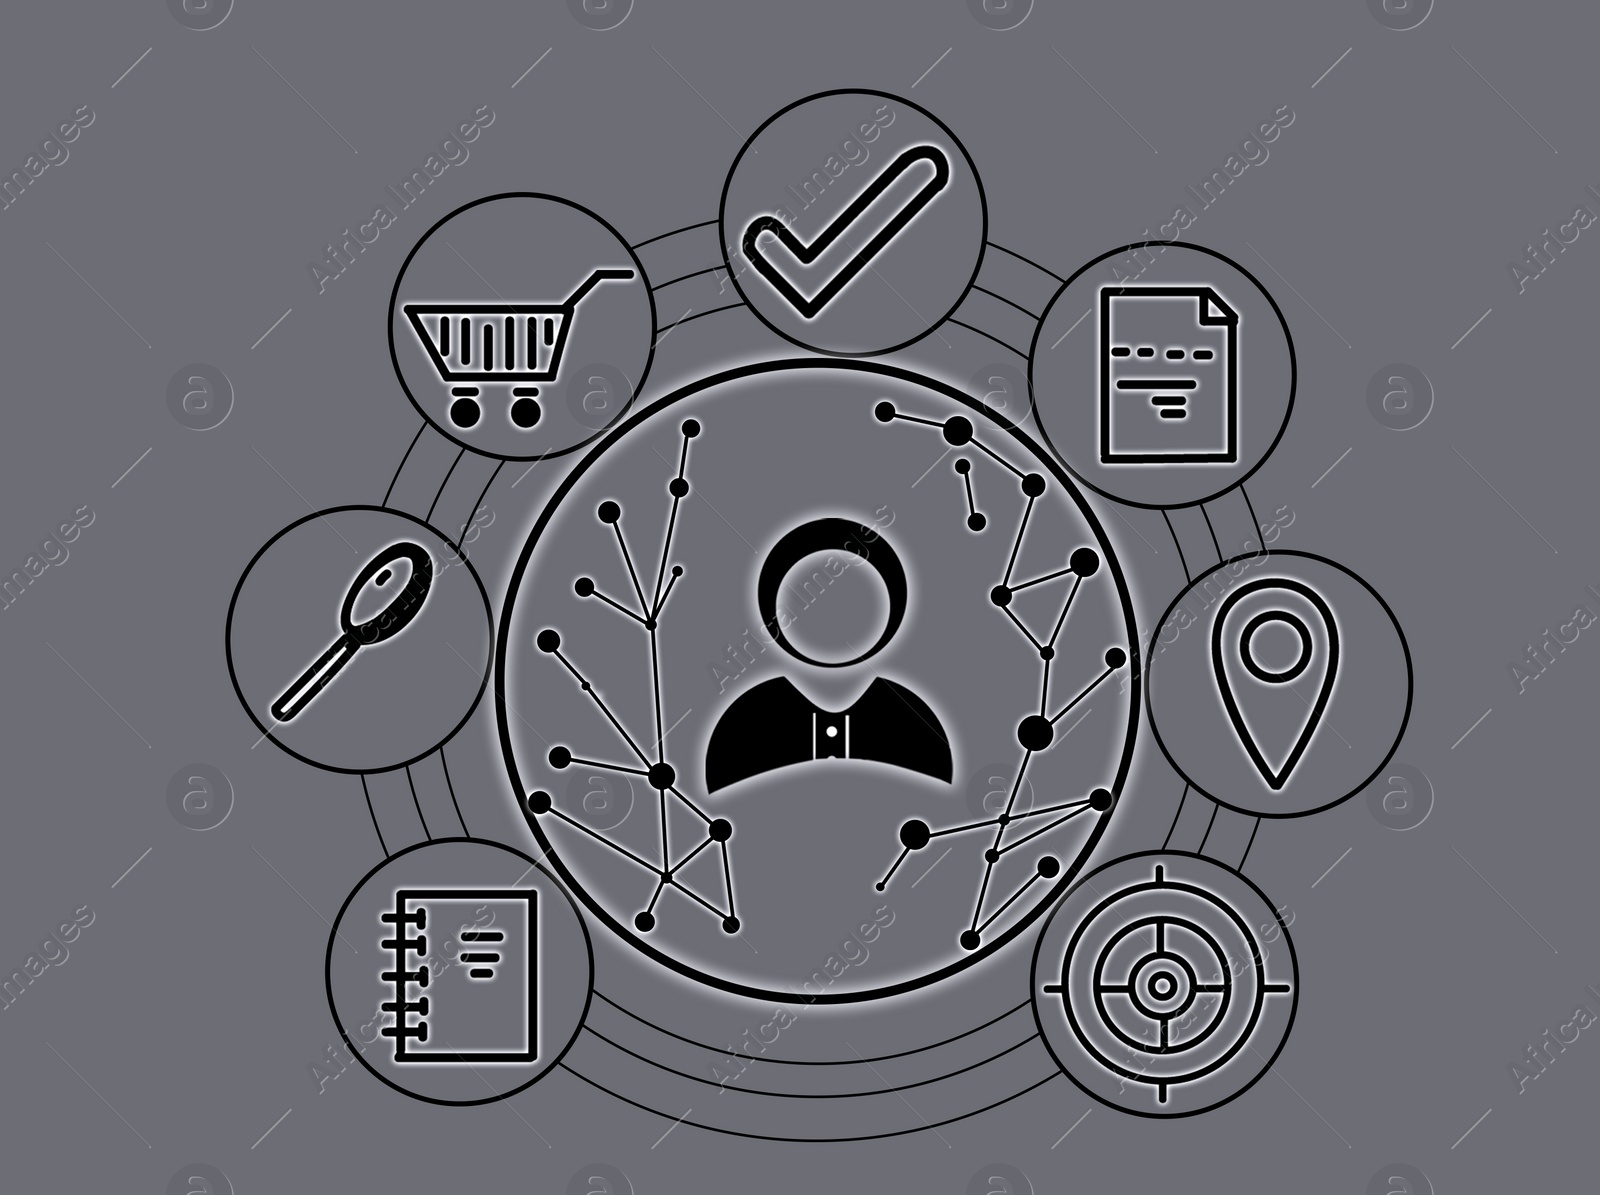 Illustration of Search inquiries. Set of different icons and human figure in center